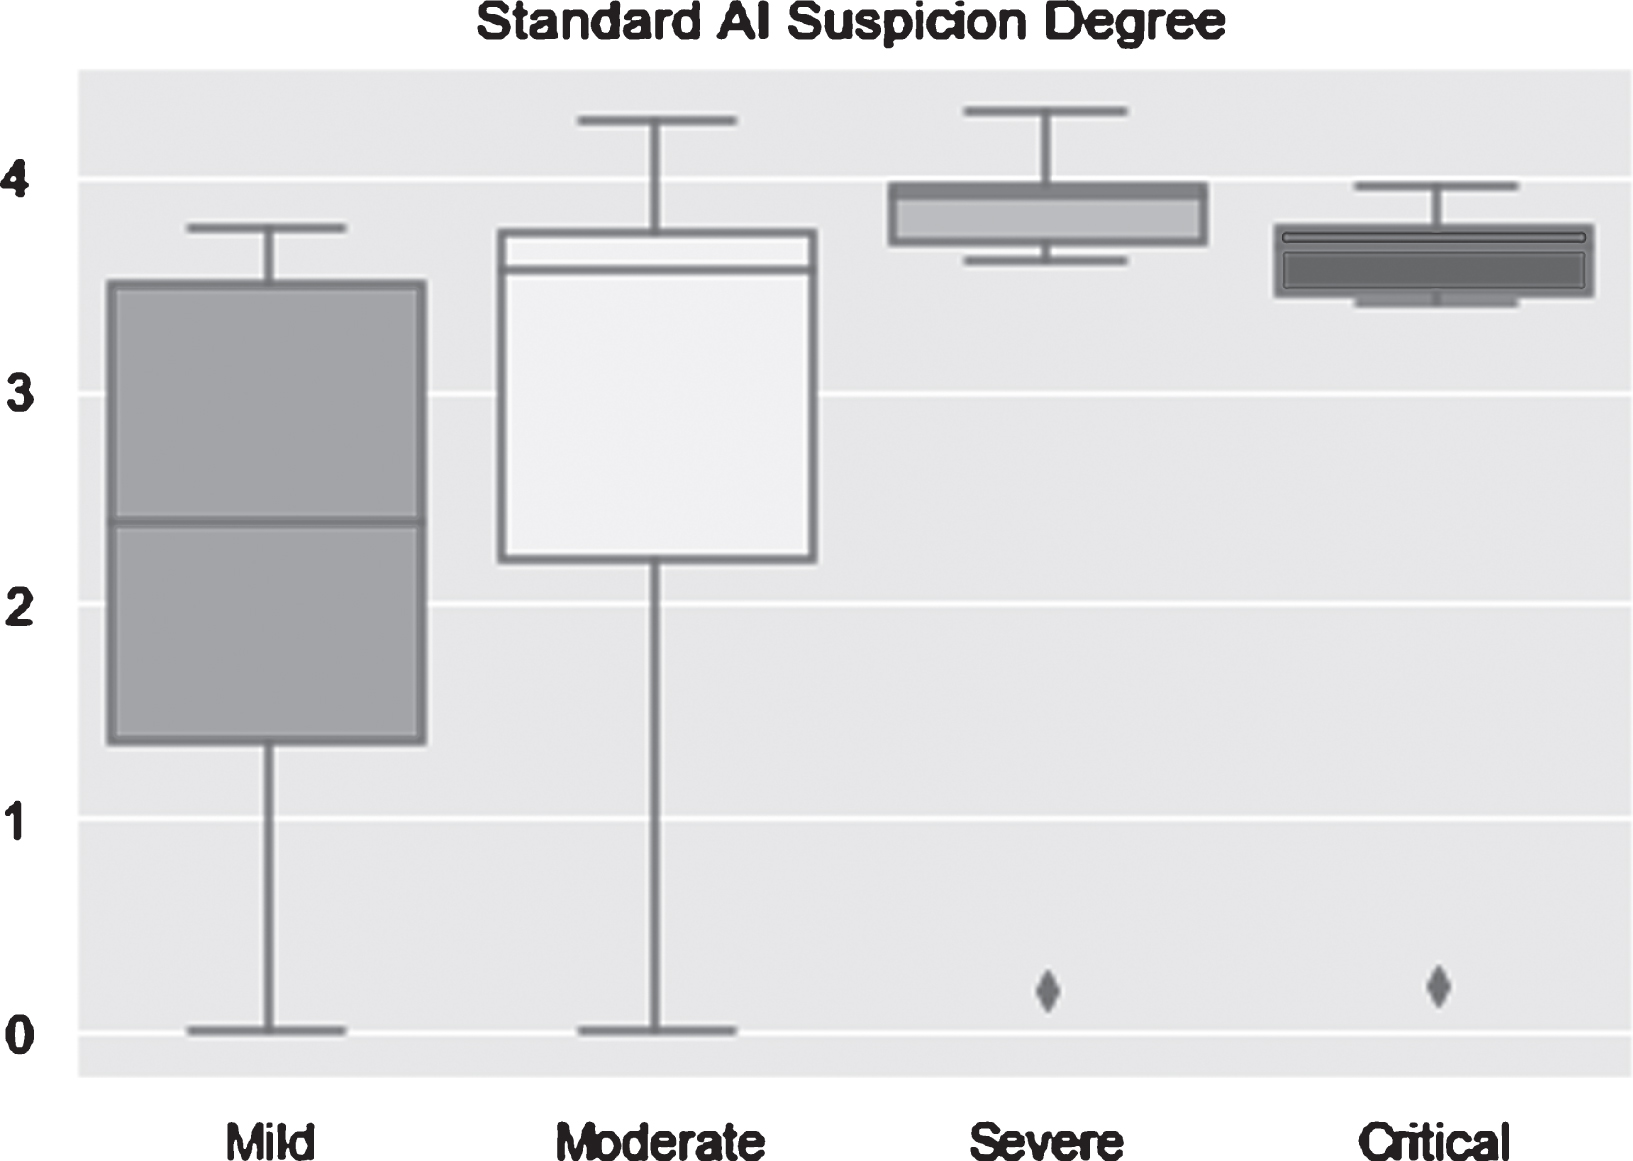 AI suspicion degree on the test set (n = 185) in differentiating among COVID-19 in mild, moderate, severe and critical types.